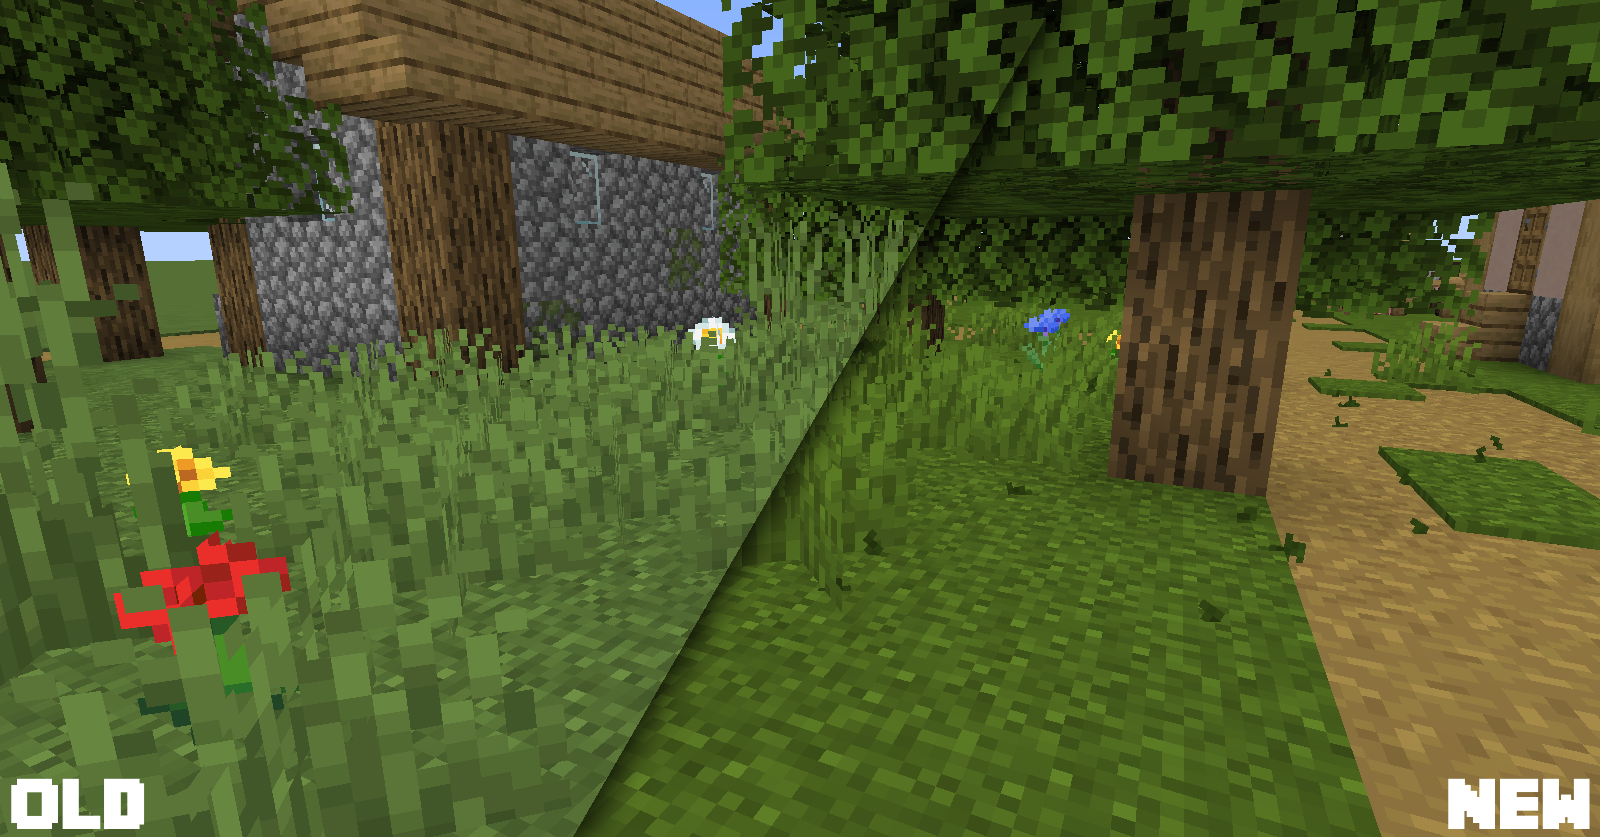 The difference between the grass color, don't worry they're not Fixed, every biome has it's own color but better!